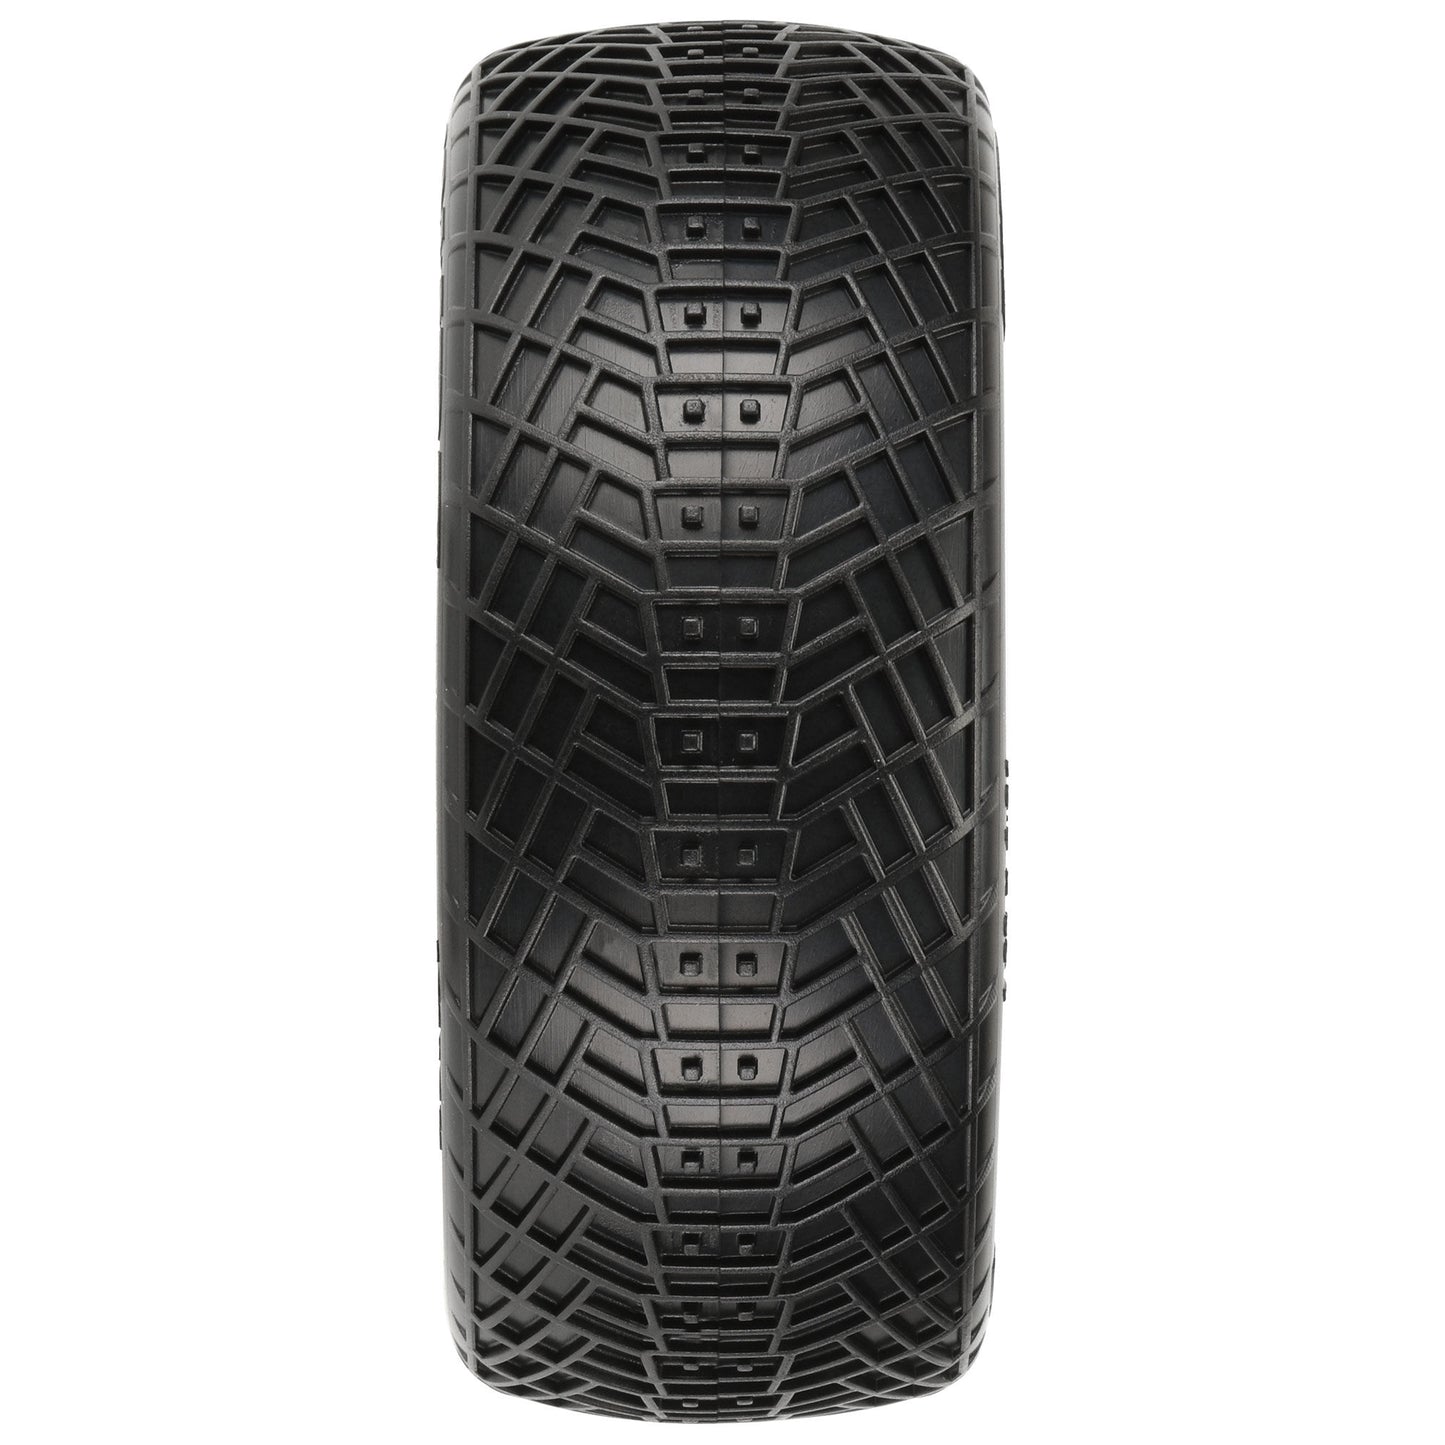 1/8 Positron MC Front/Rear Off-Road Buggy  tyres (2)